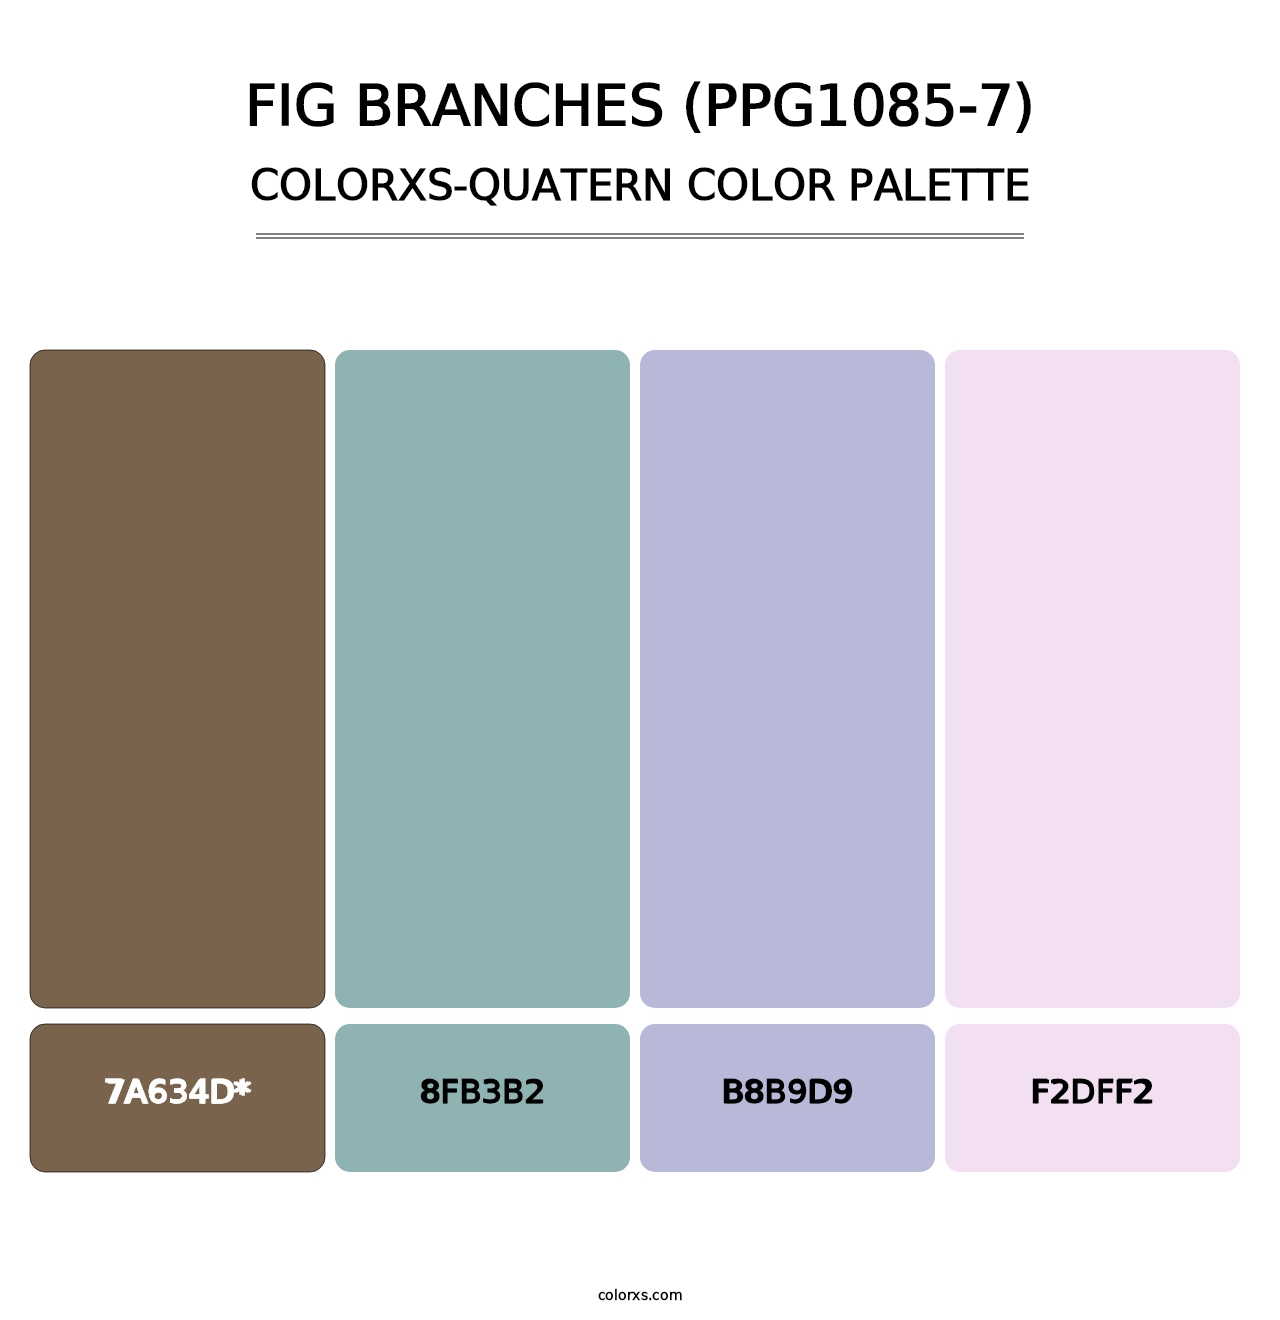 Fig Branches (PPG1085-7) - Colorxs Quatern Palette